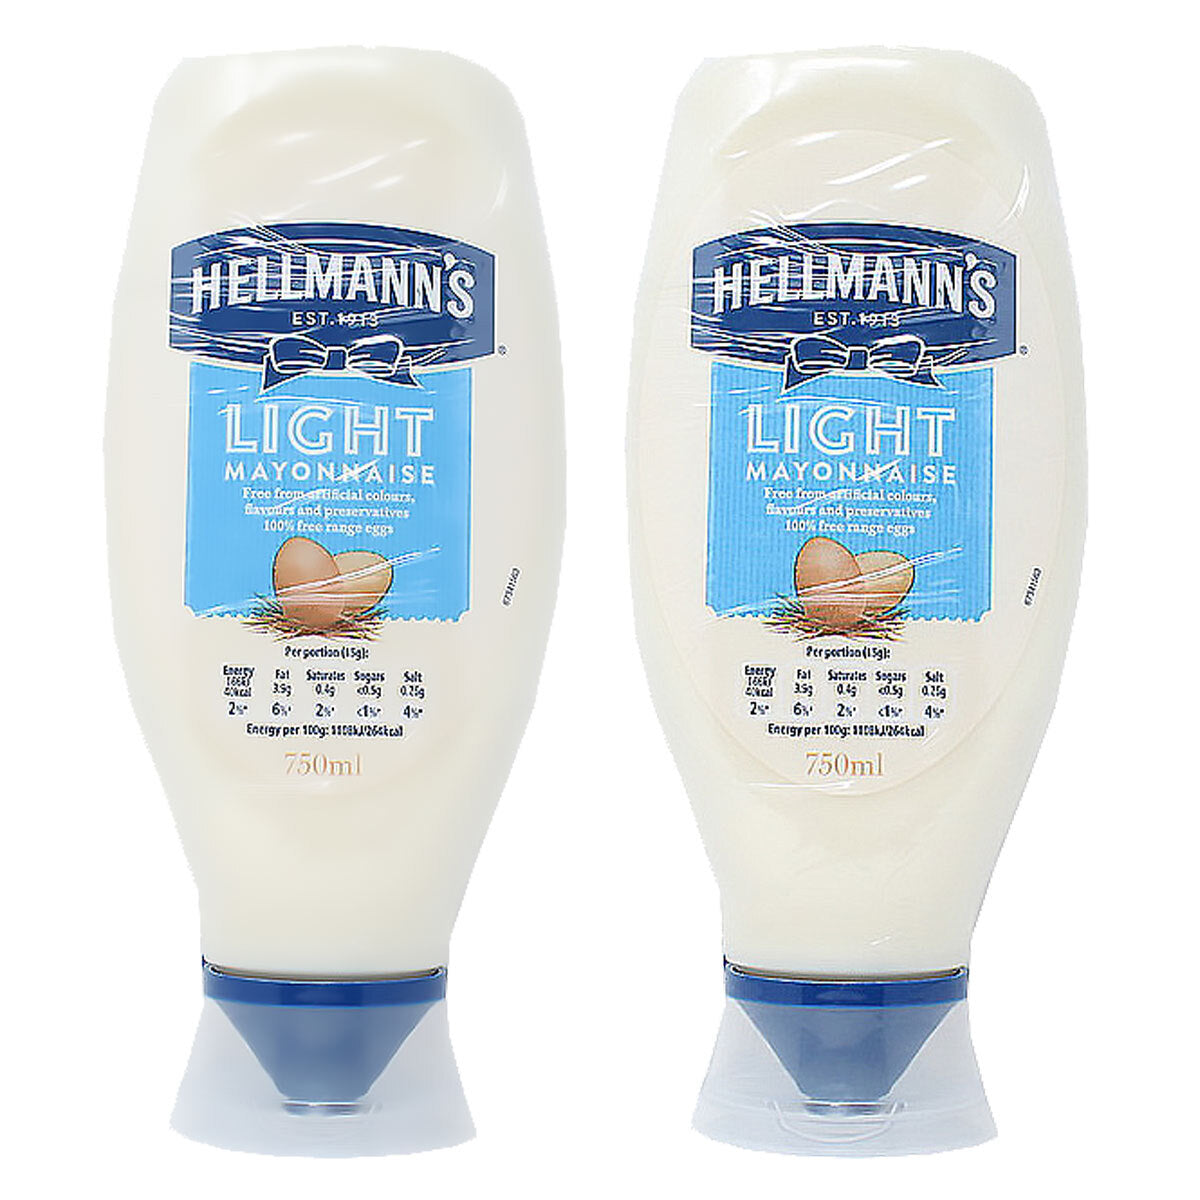 Hellmann's Light Squeezy Mayonnaise, 2 x 750ml Spreads Costco UK weight  